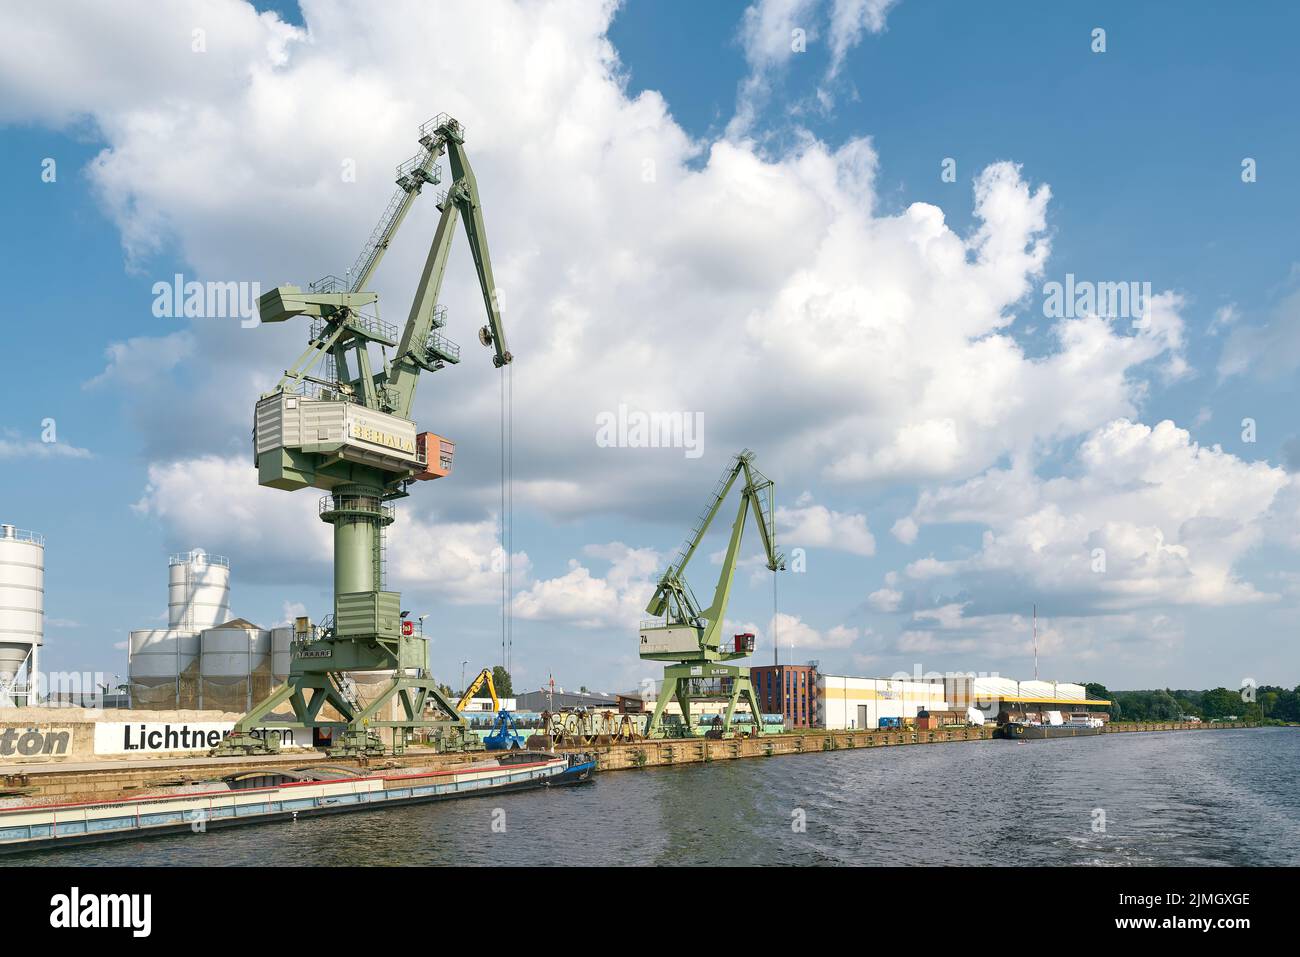 Cranes and industry in the southern harbor of the Berlin district of Spandau on the Havel River Stock Photo